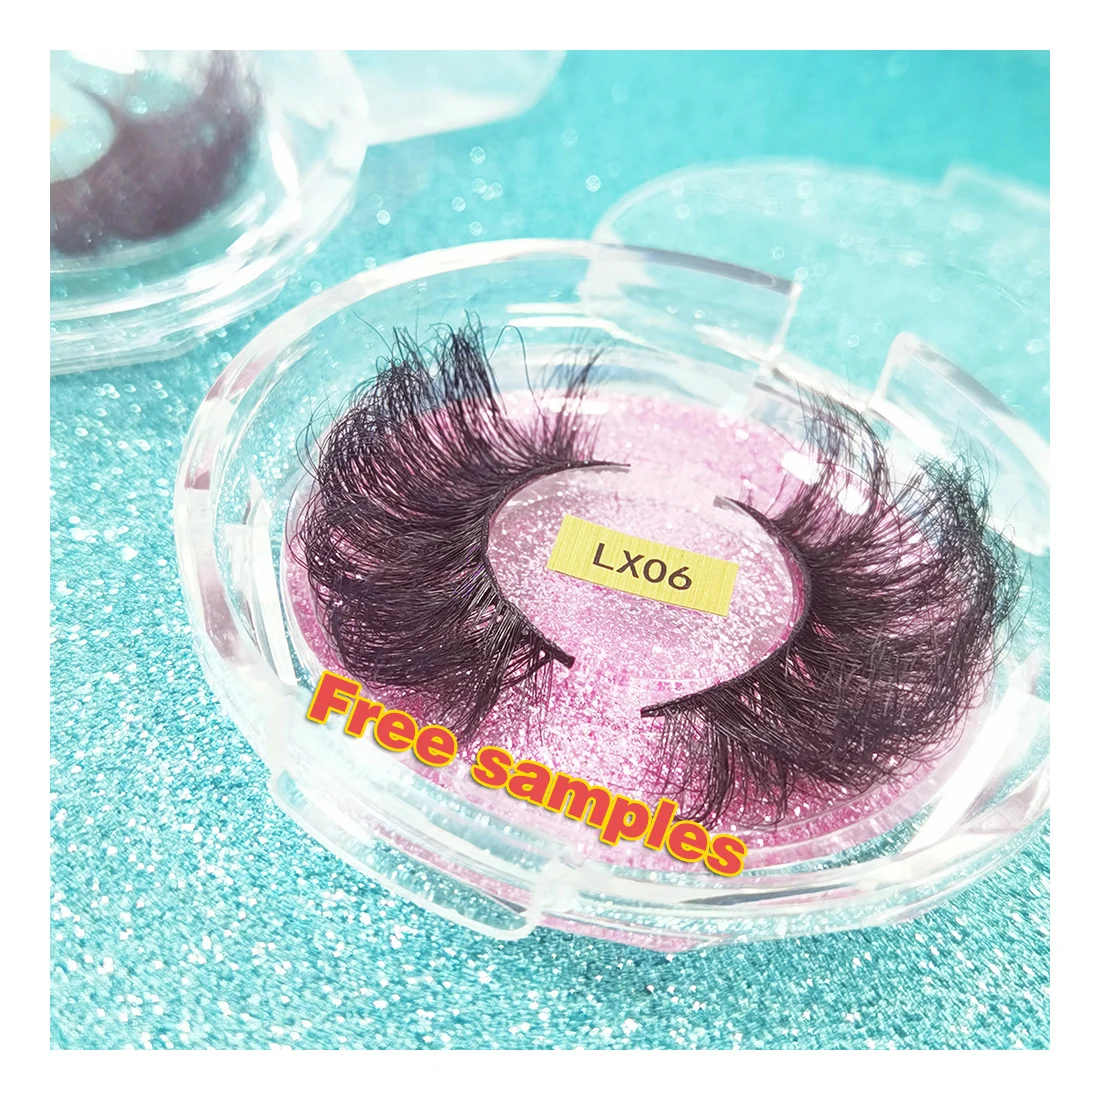 

Natural Long russian volume strip lashes wholesale wink winged eyelash extensions c d dd curl strip eyelashes KAVVAWU curl